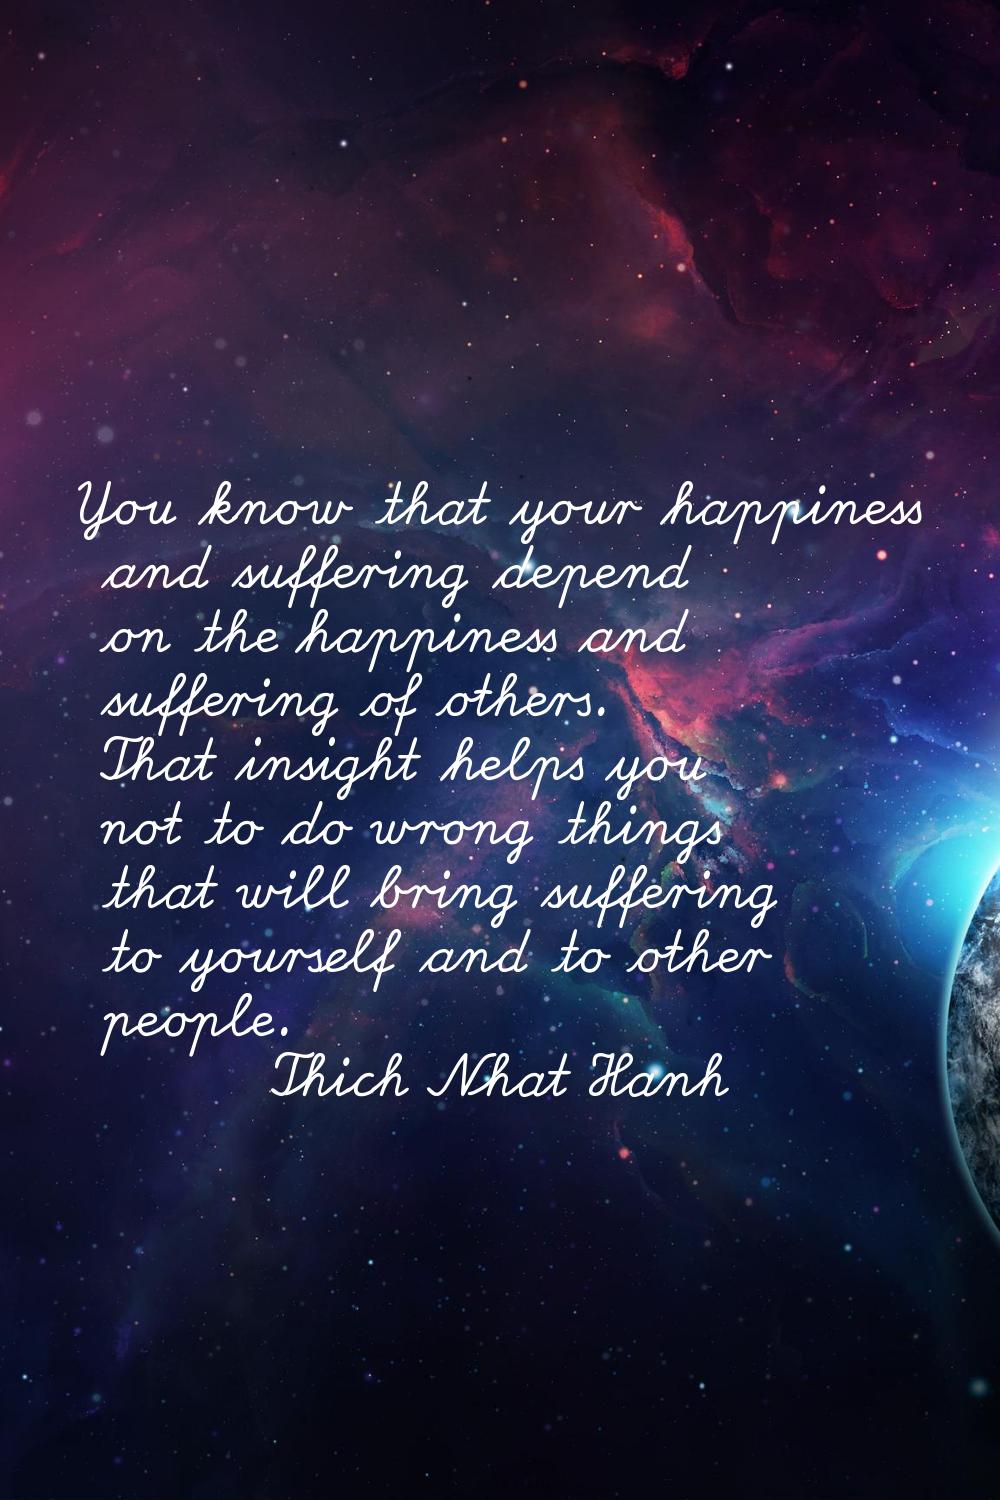 You know that your happiness and suffering depend on the happiness and suffering of others. That in